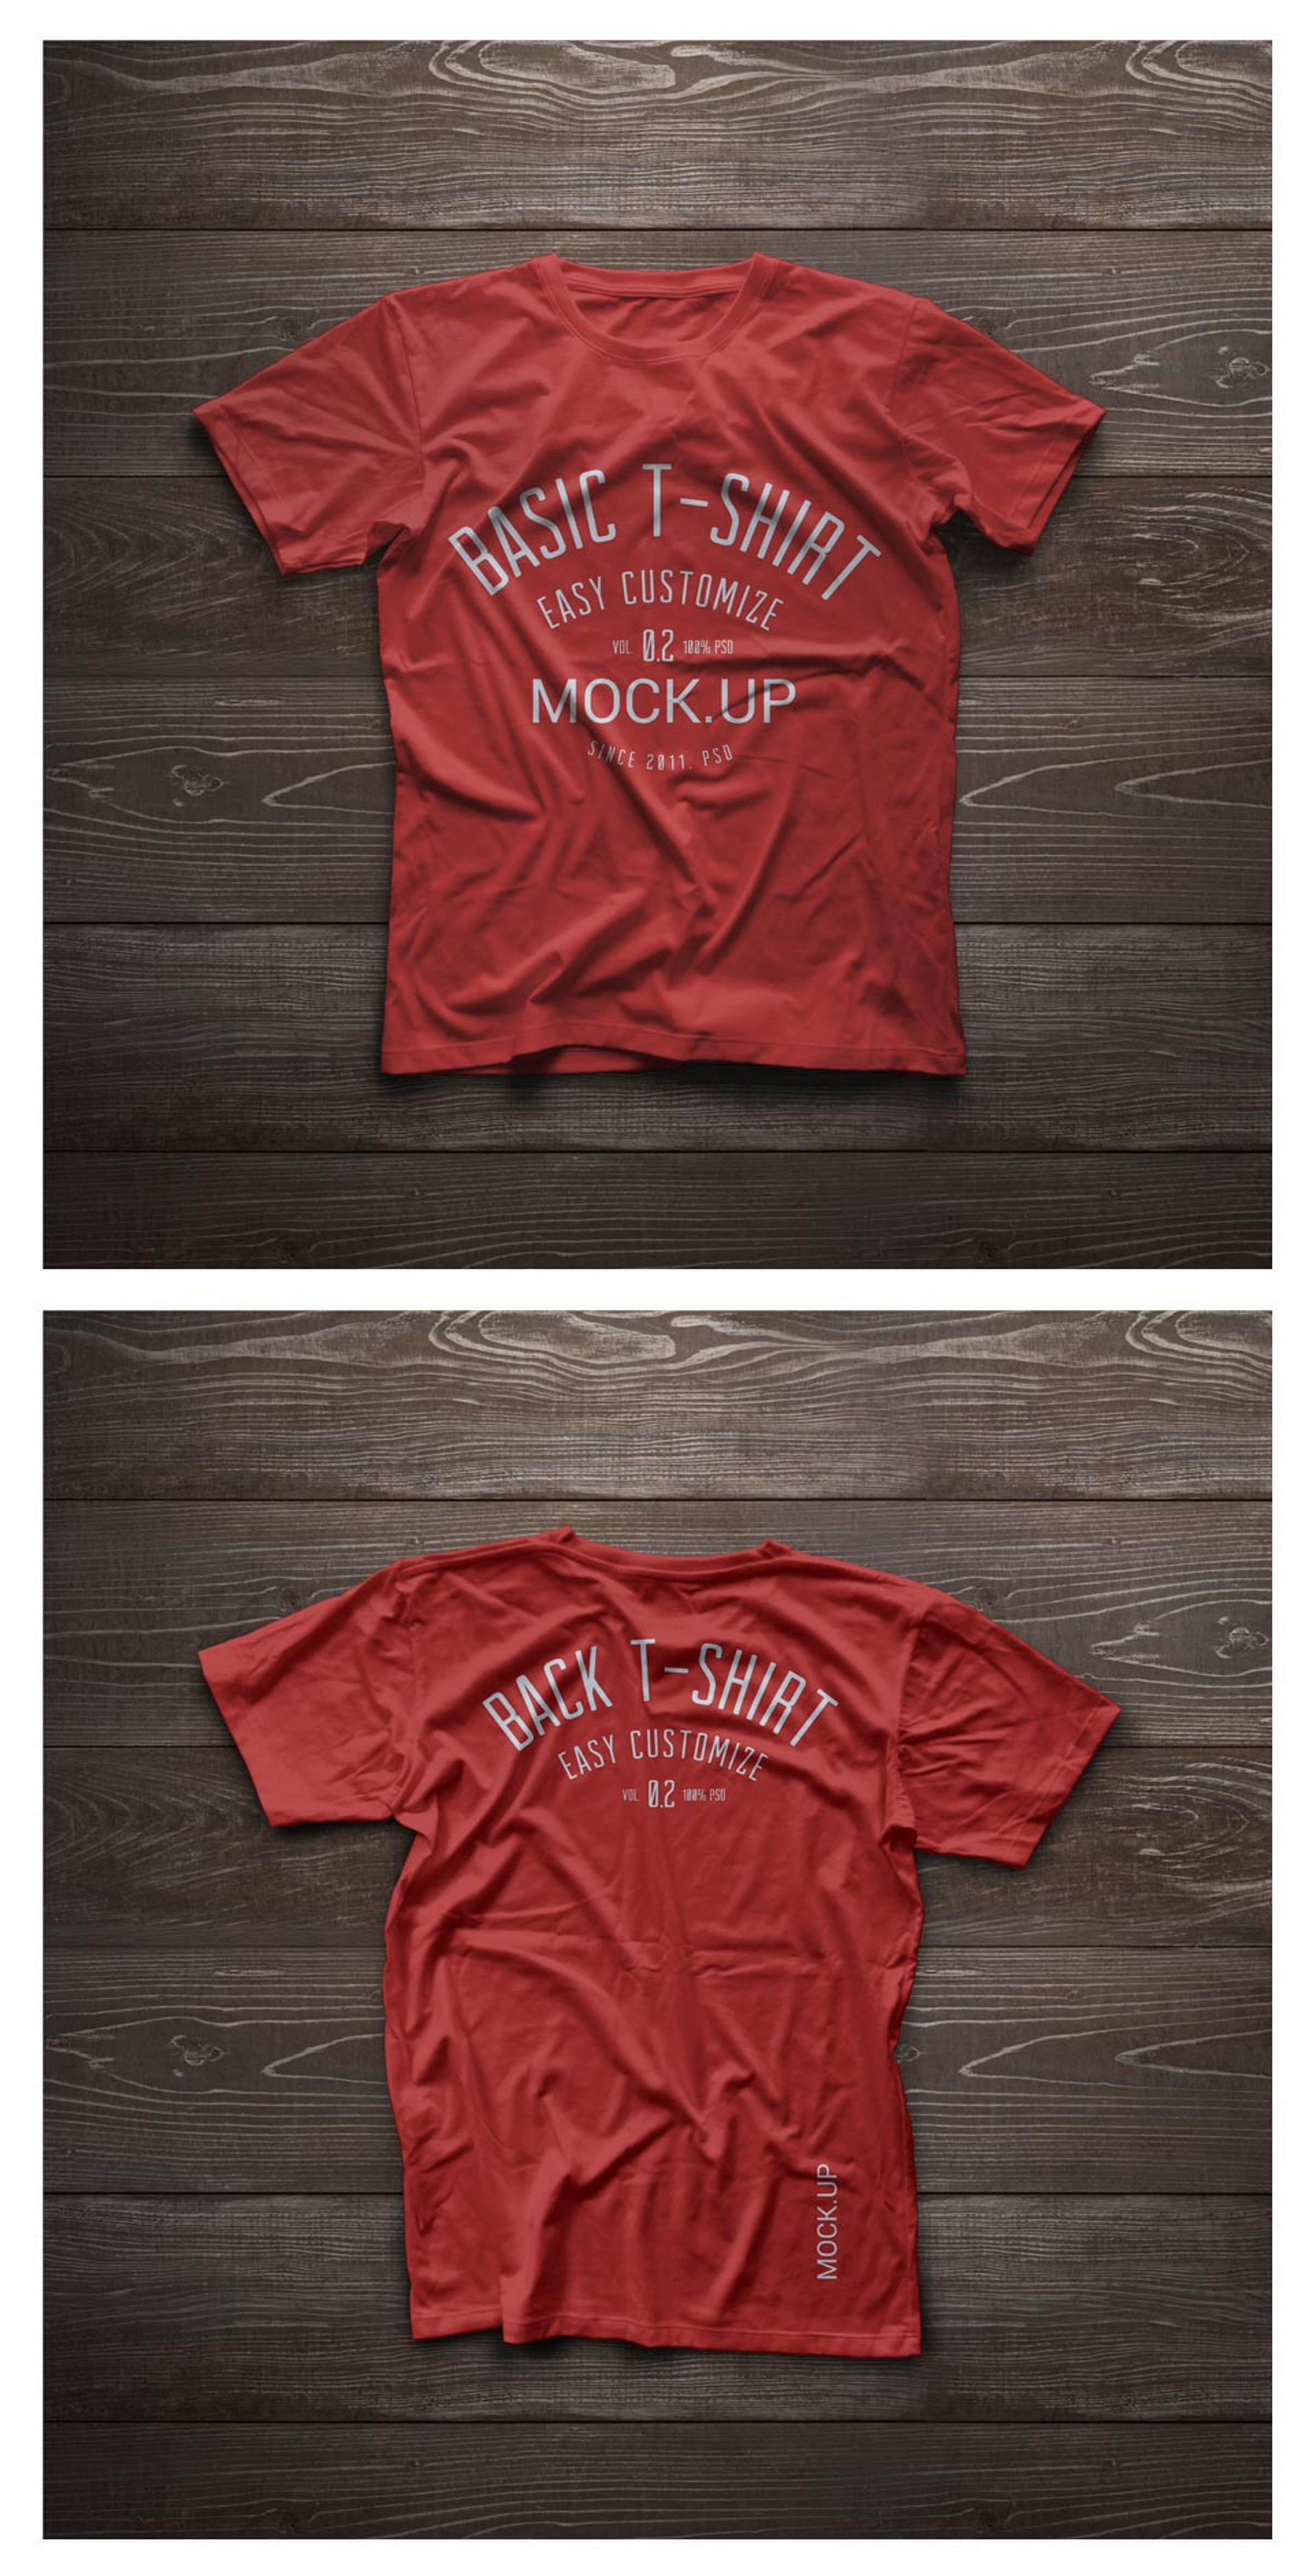 template red t shirt